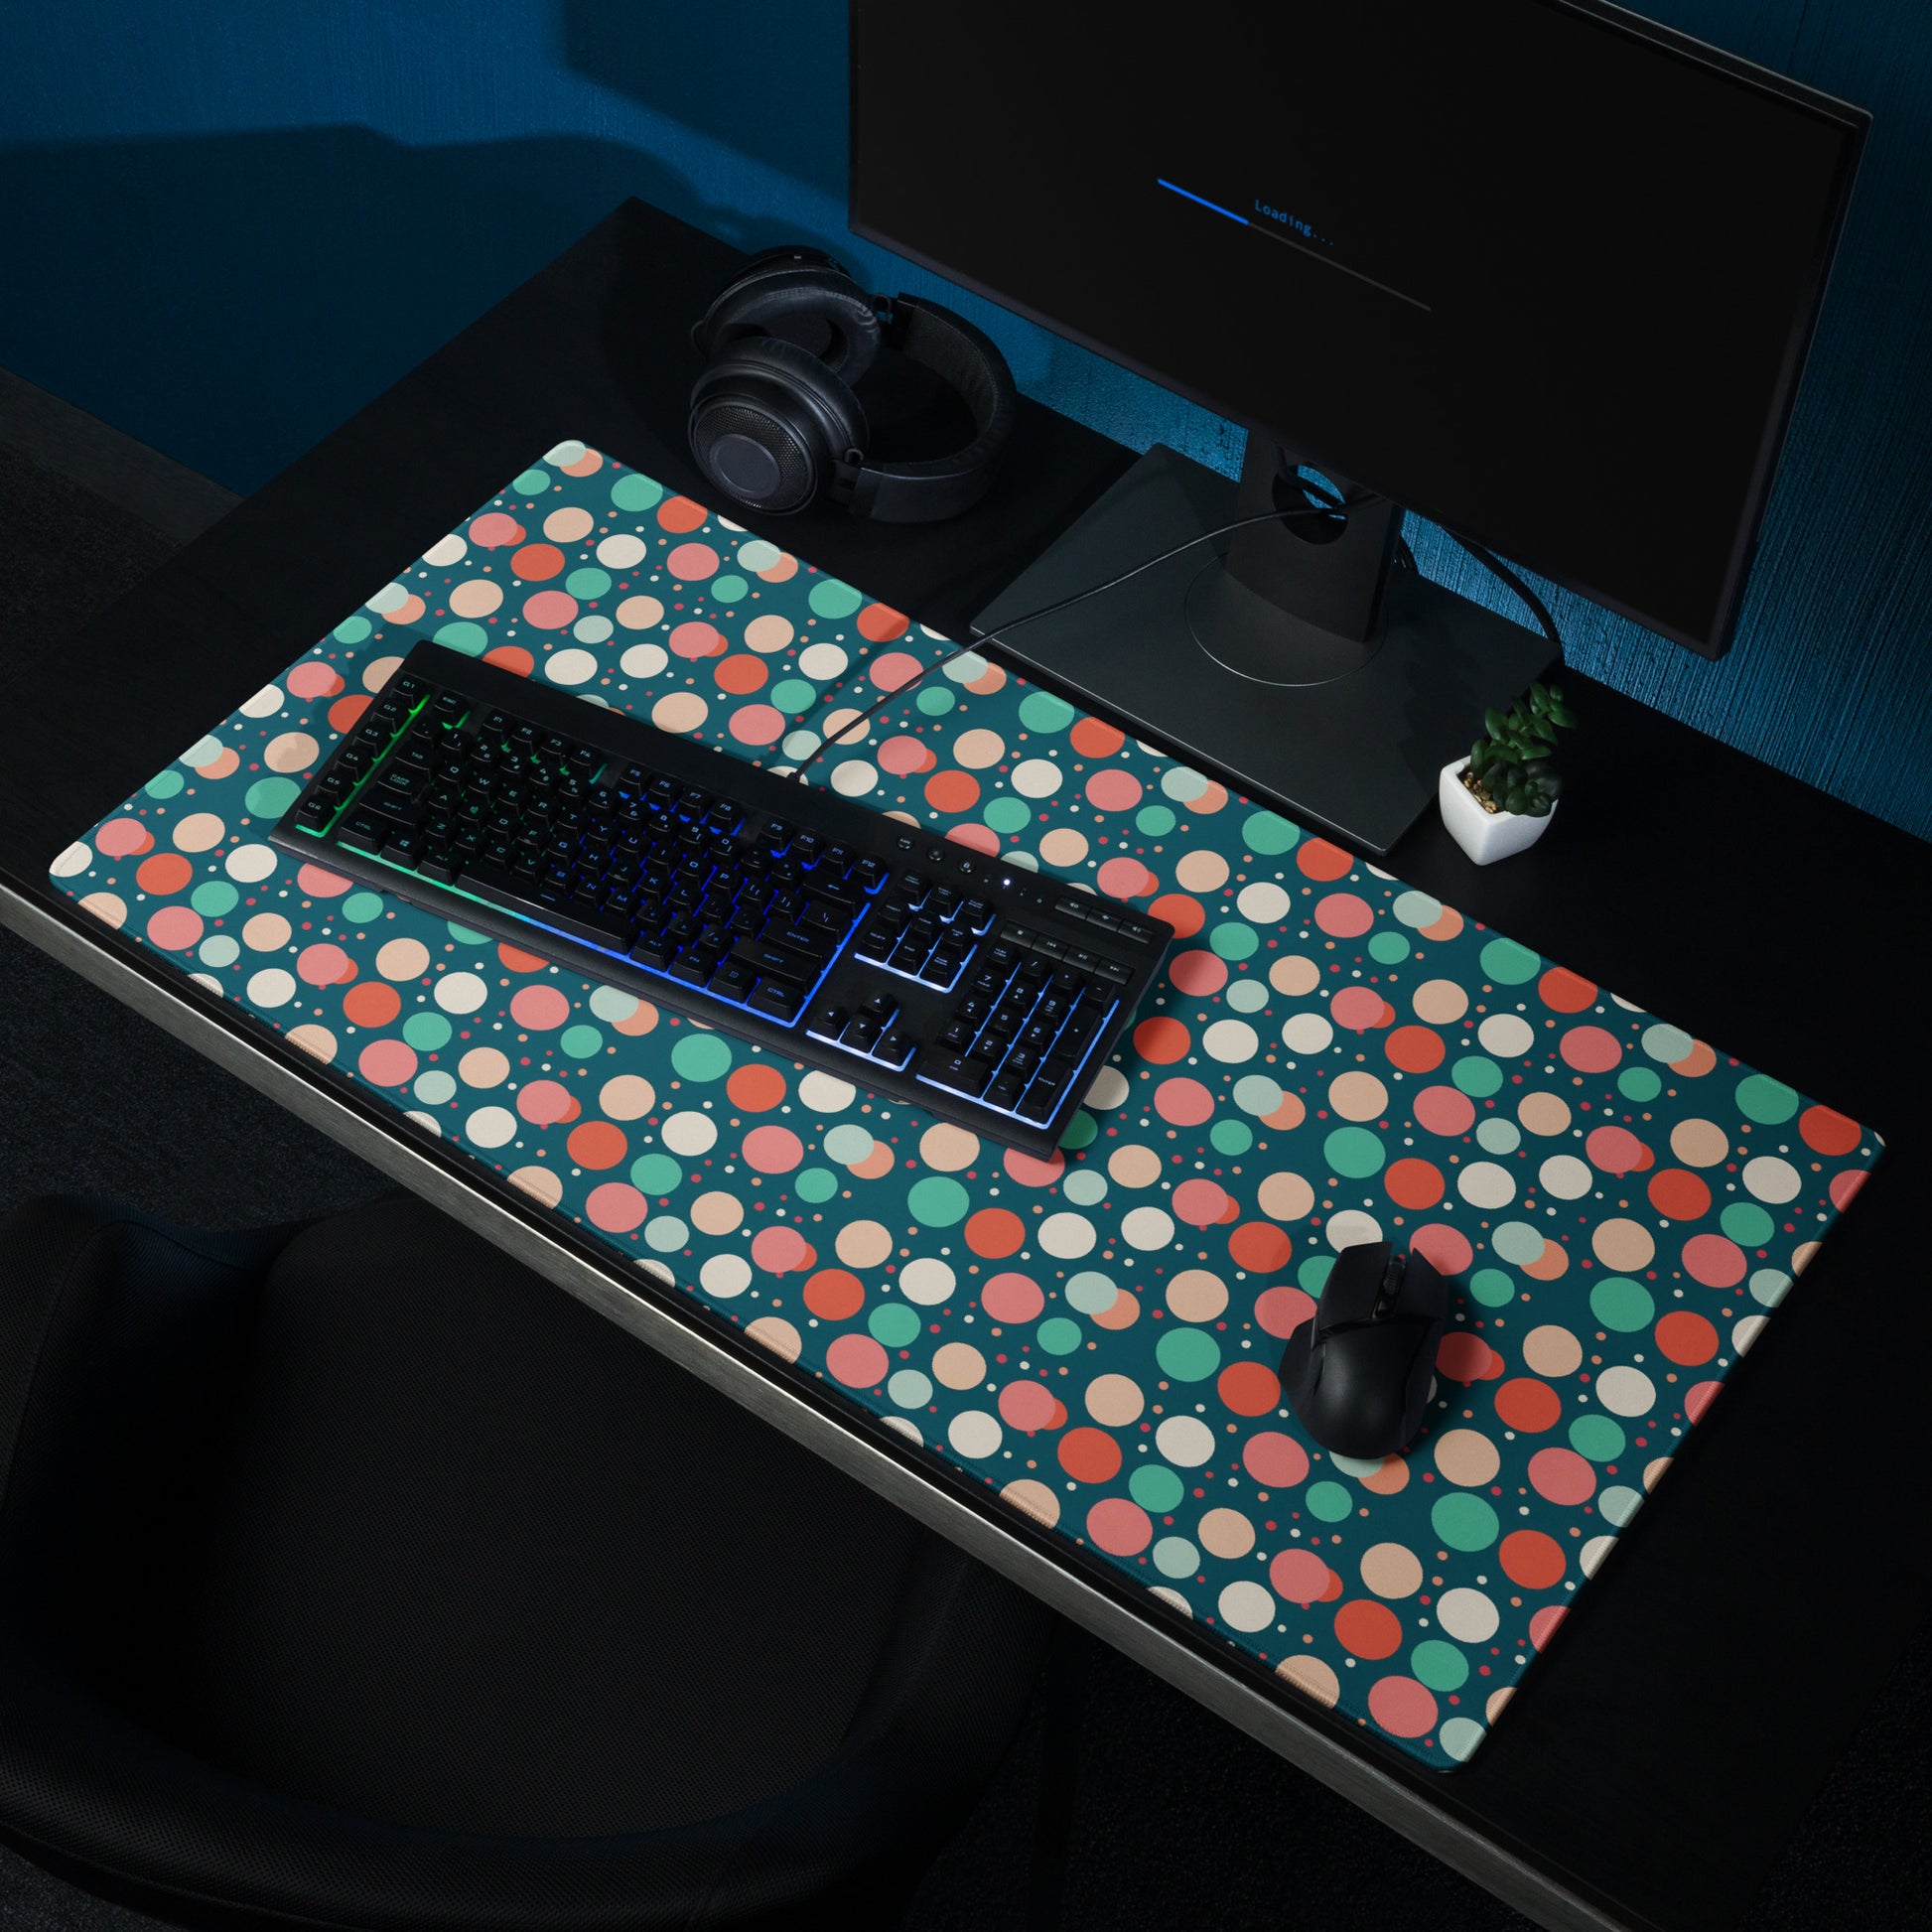  A 36" x 18" desk pad with red teal and yellow polka dot pattern sitting on a desk.